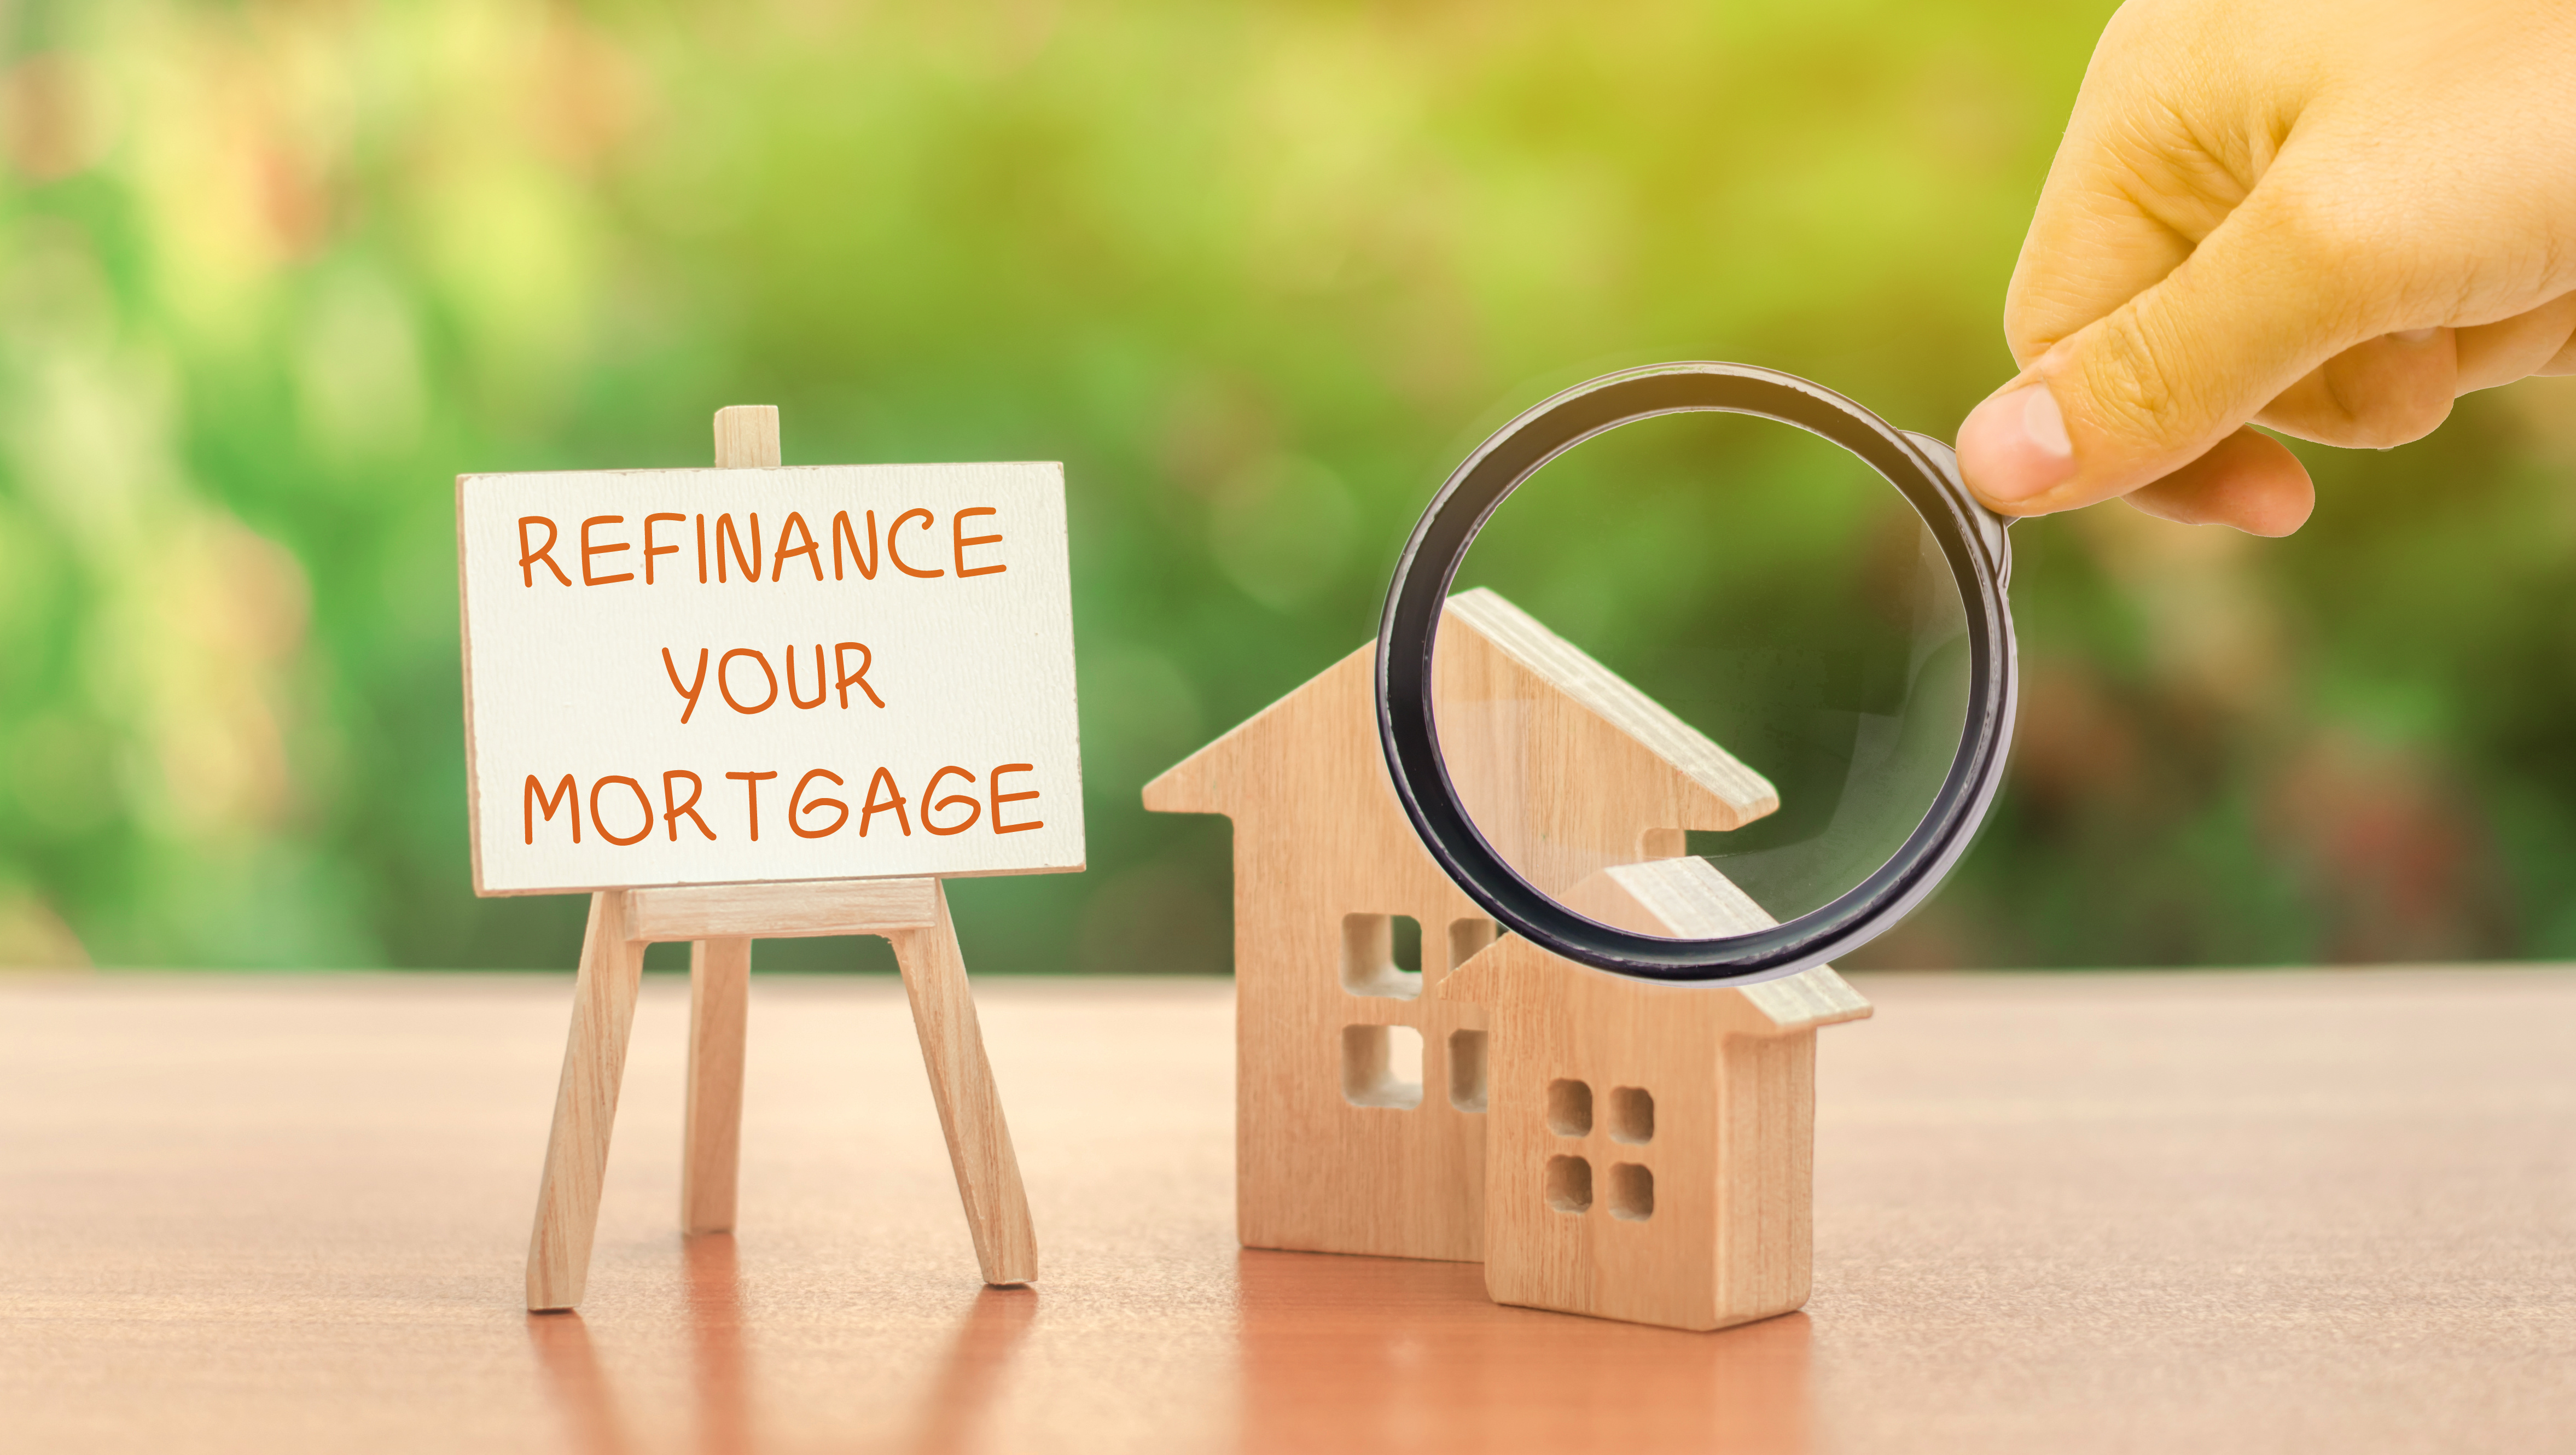 Learn everything about mortgage refinancing. Source: Adobe Stock.